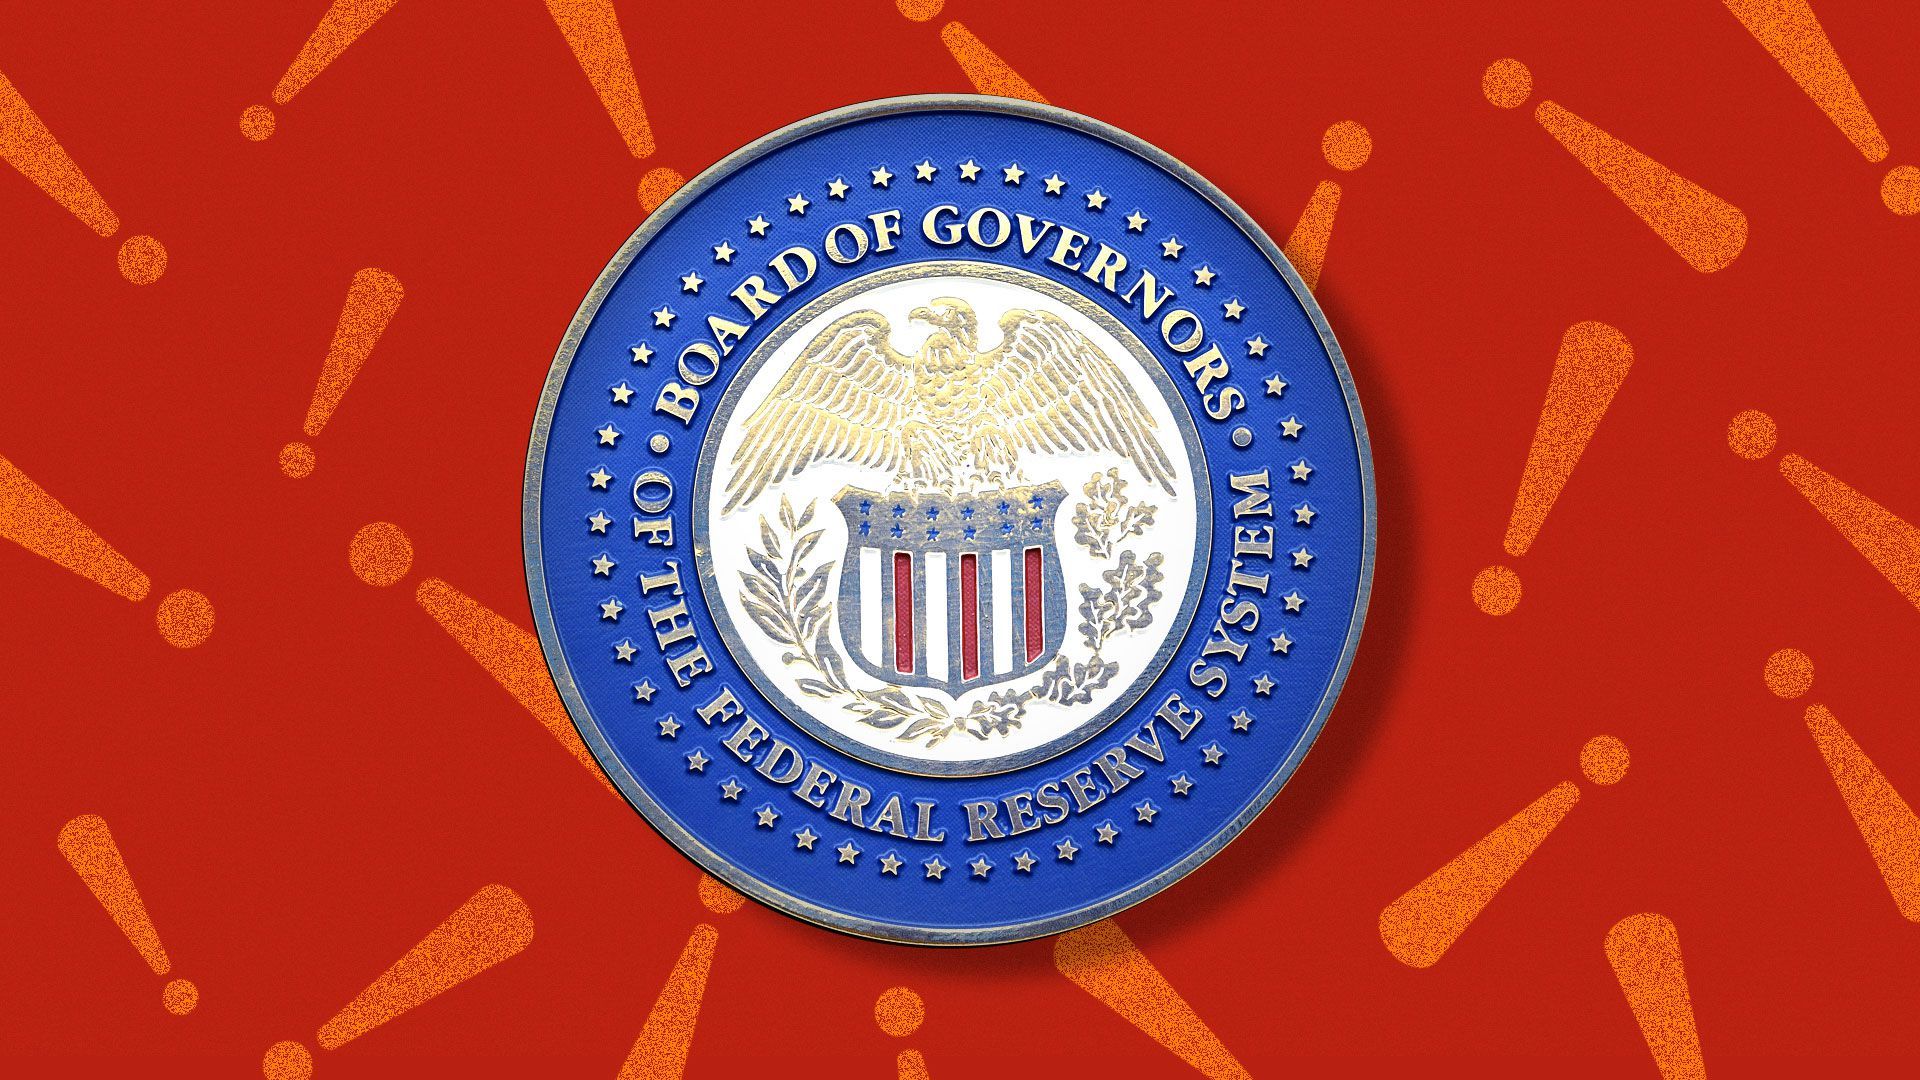 Illustration of The Federal Reserve seal on a background exclamation.